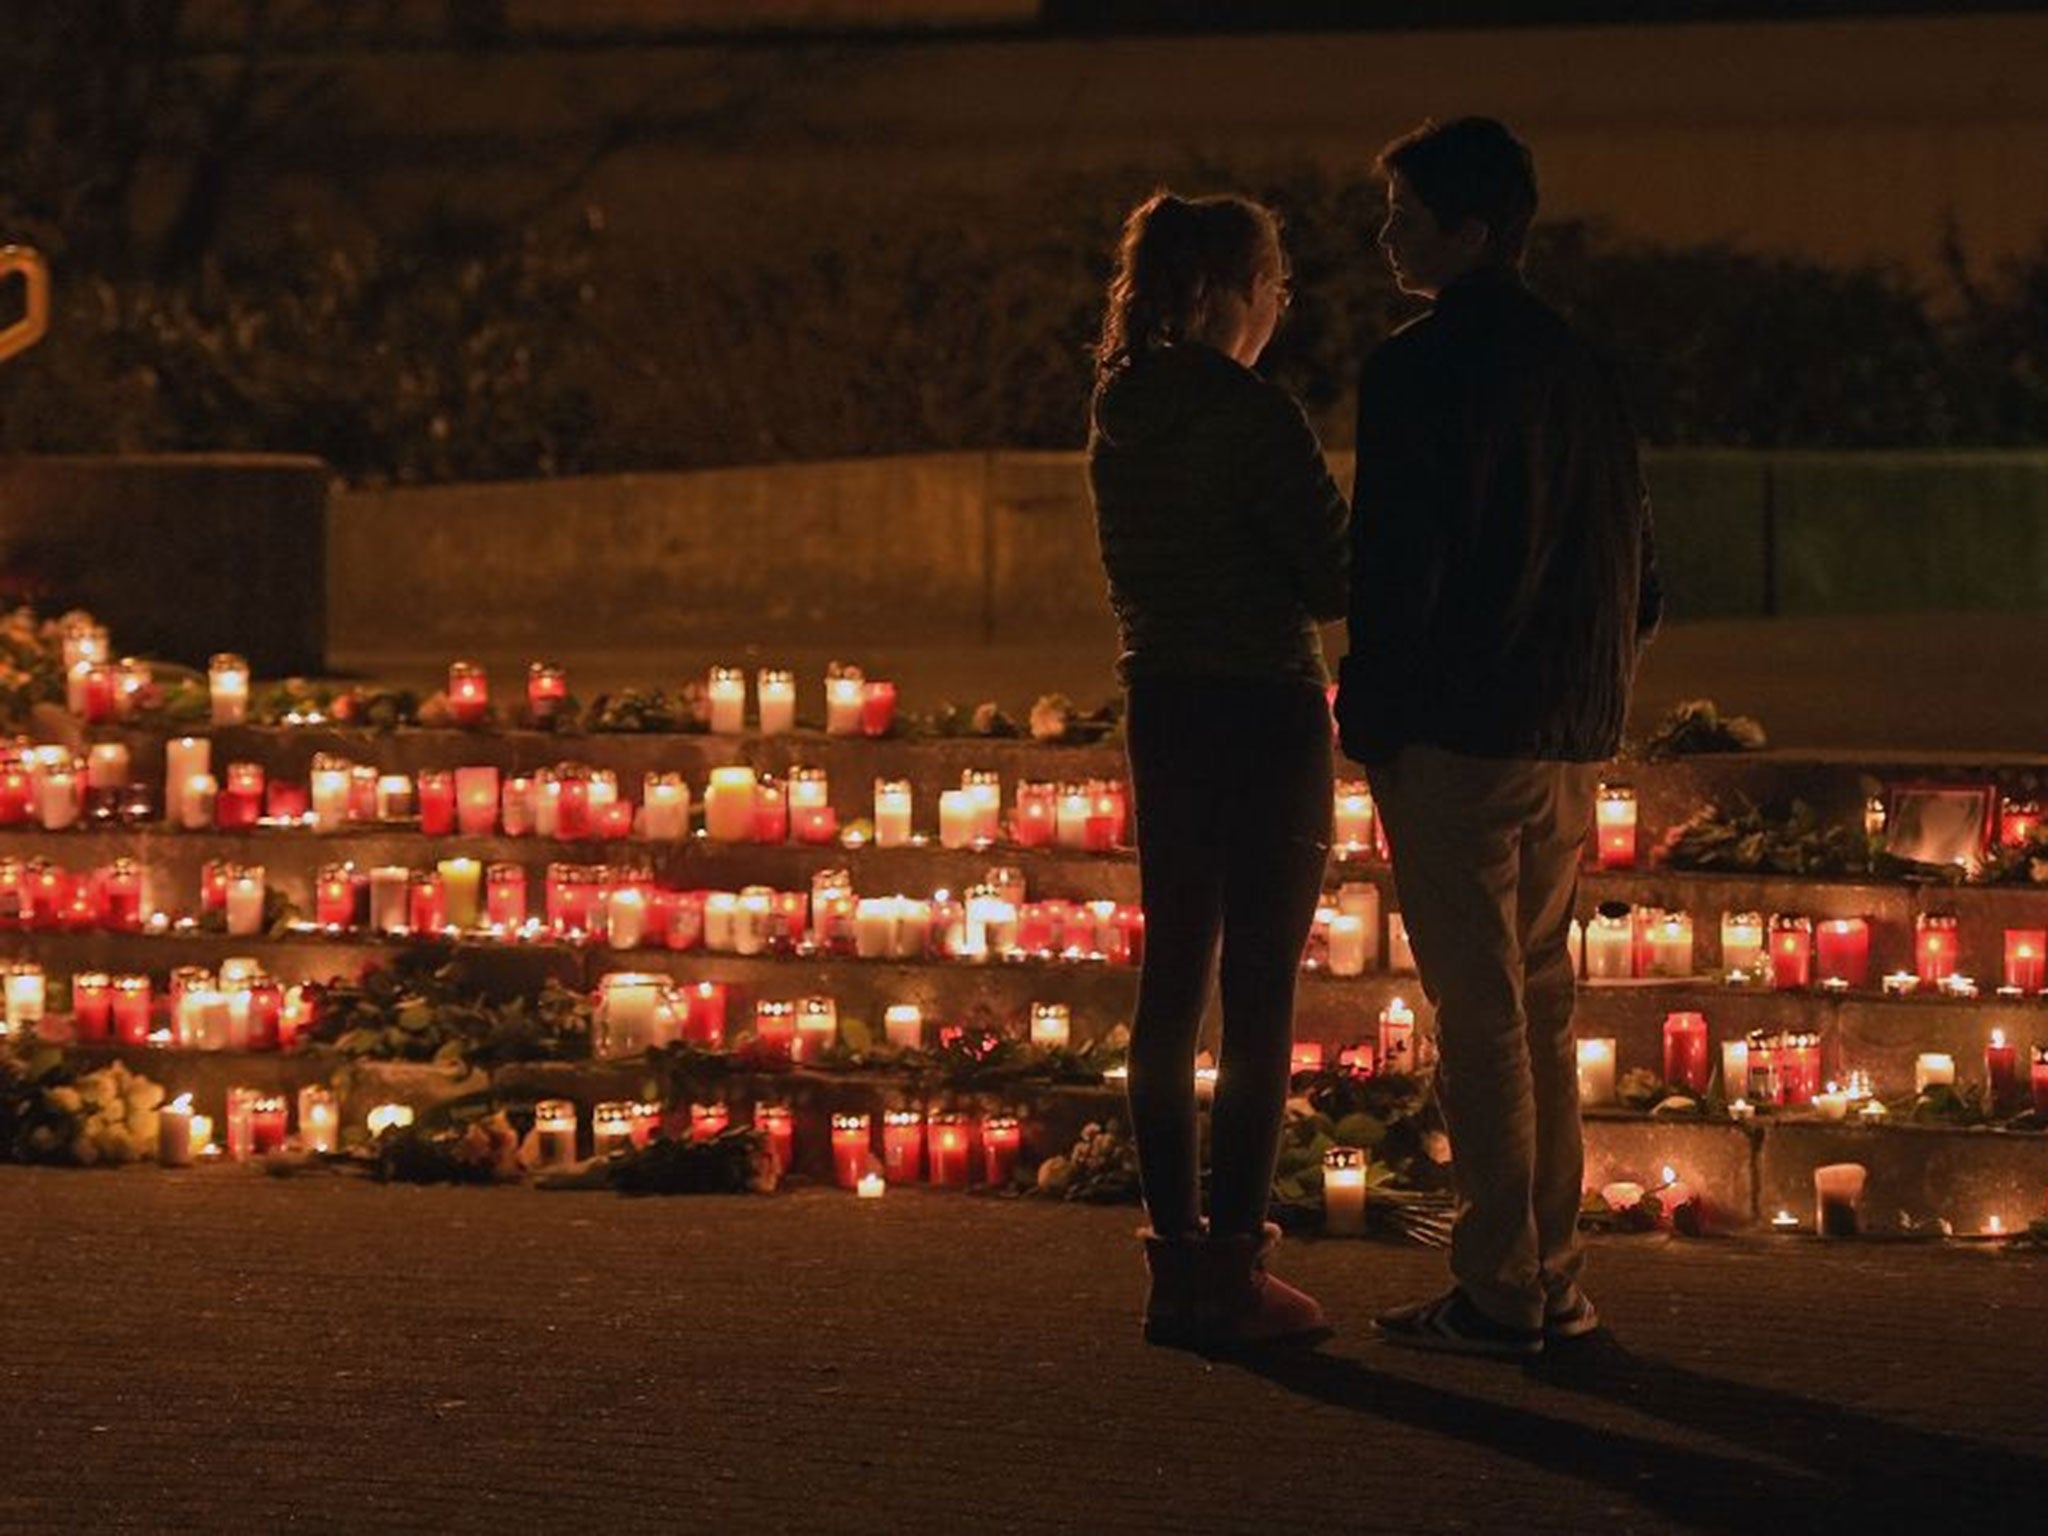 Students stand in front of candles in front of the Joseph-Koenig Gymnasium.